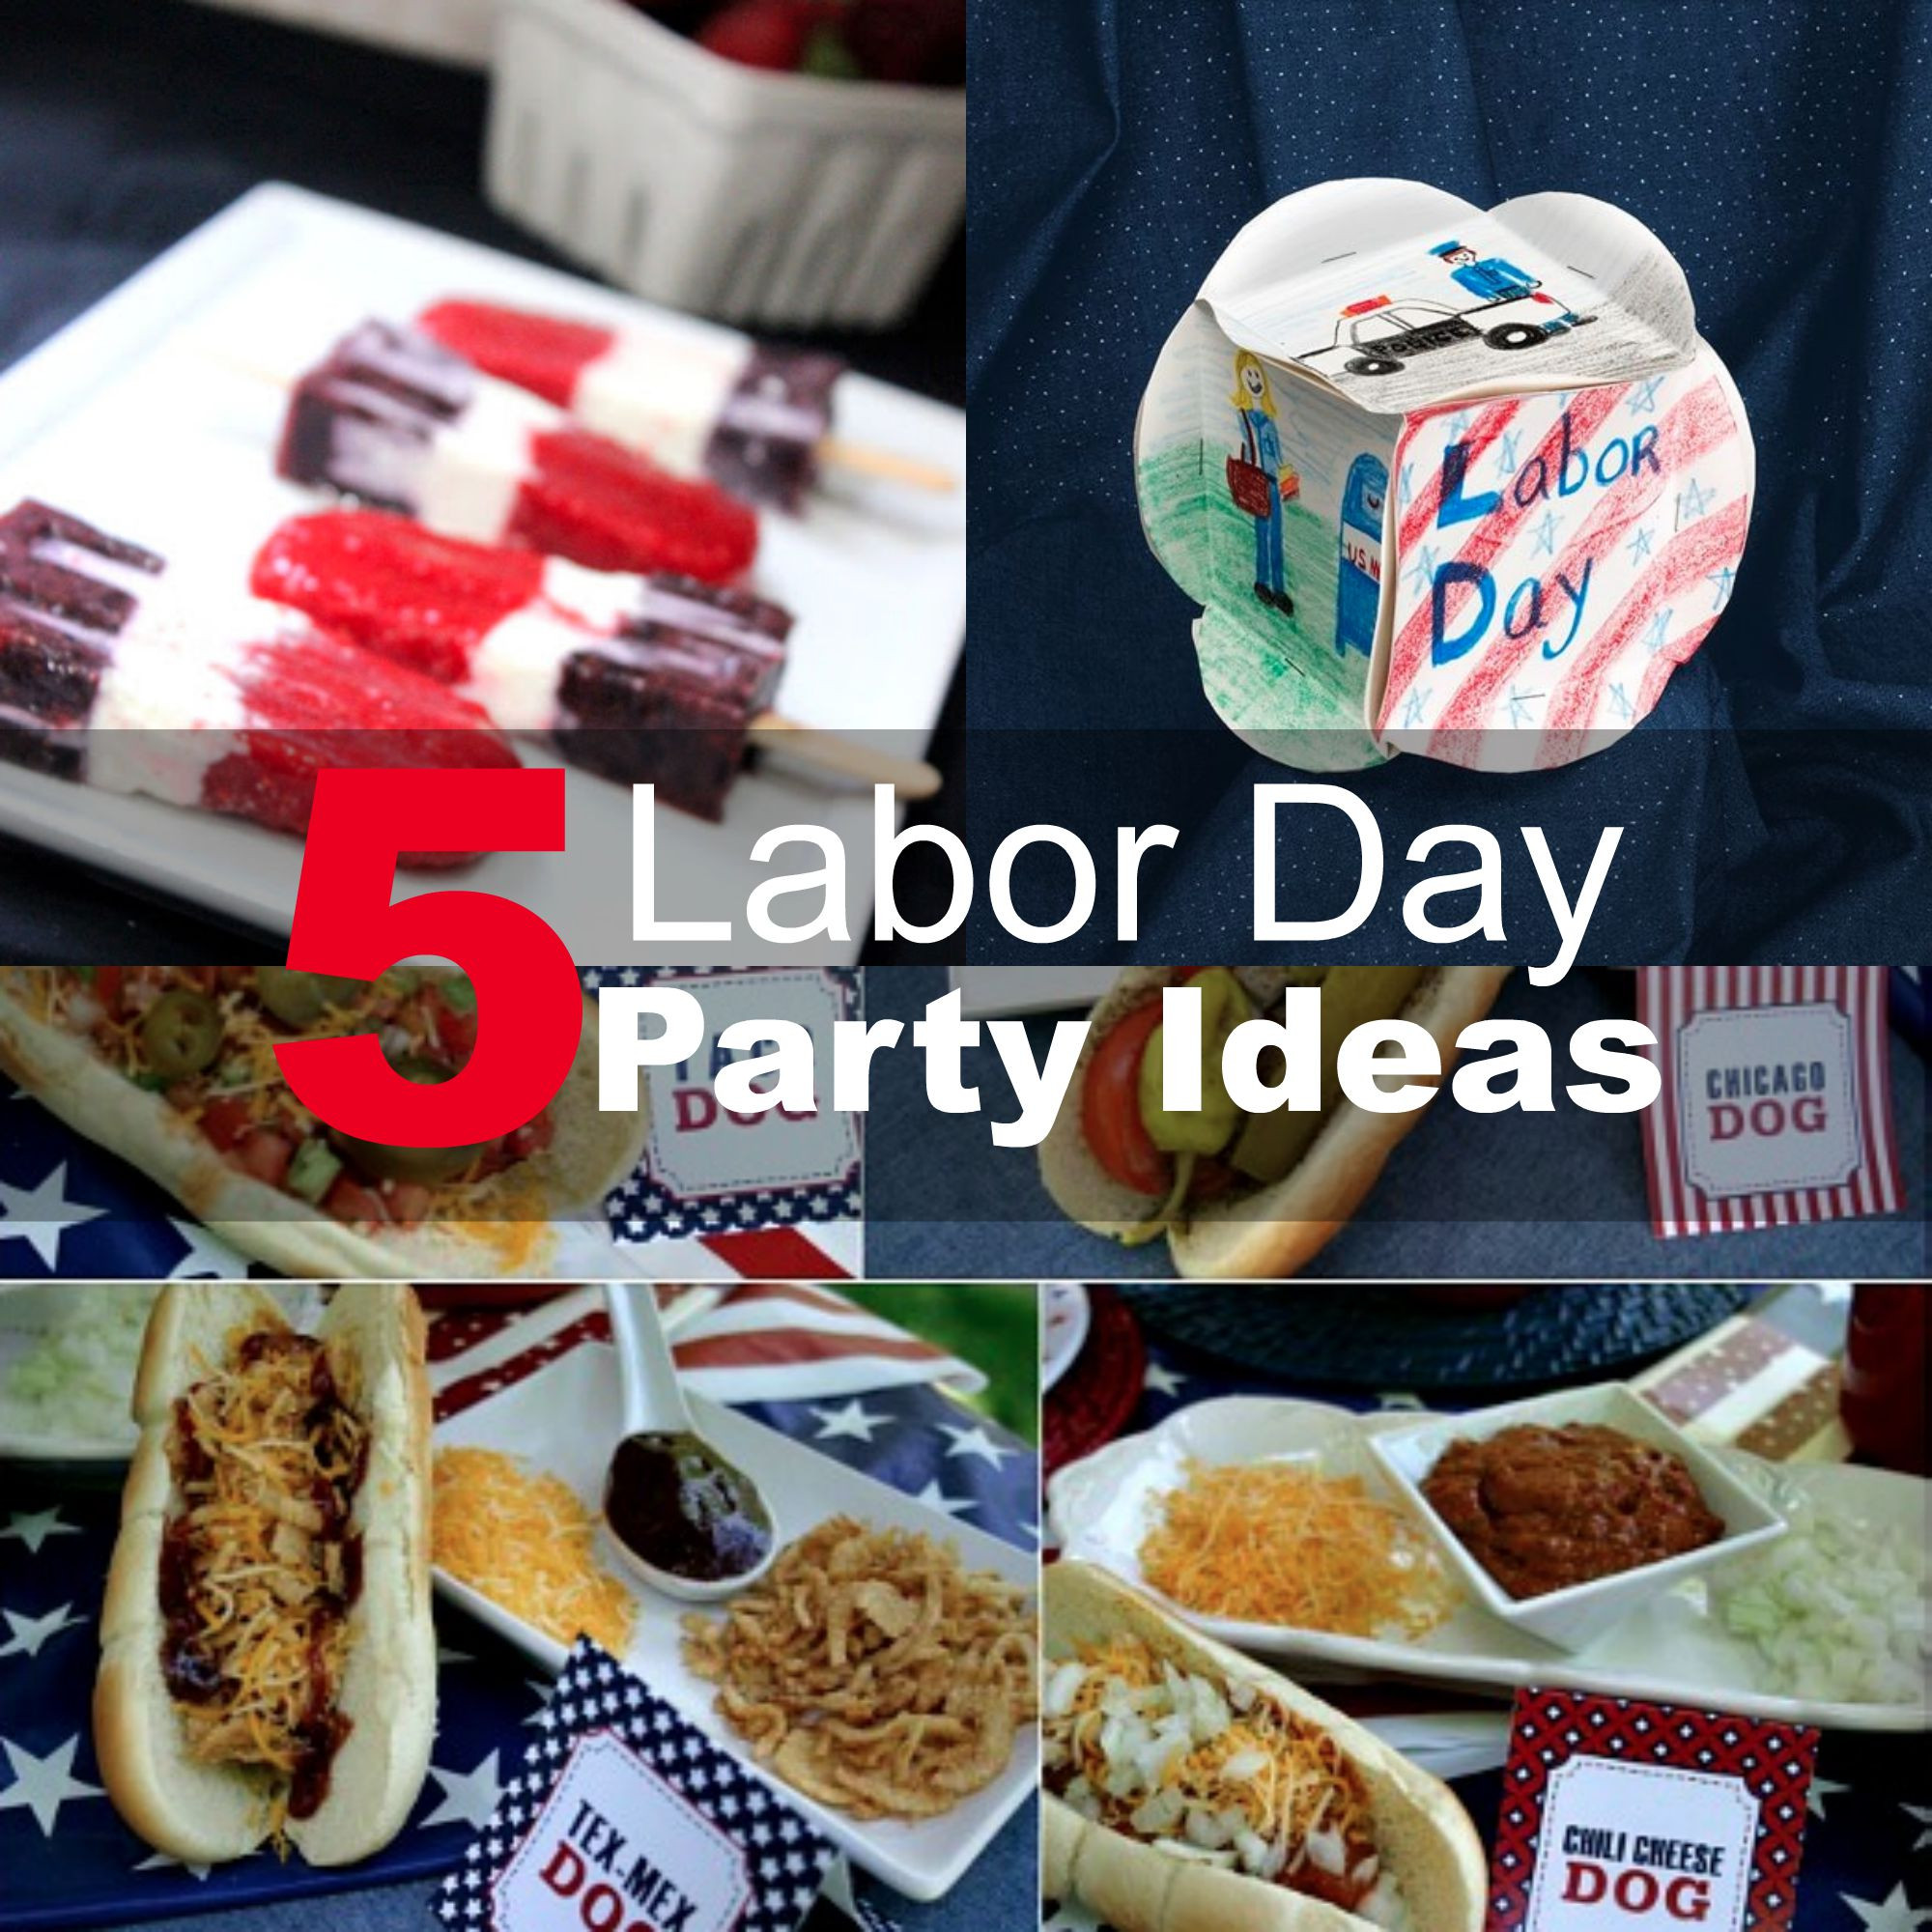 Labor Day Party Themes
 5 Labor Day Party Ideas 2015